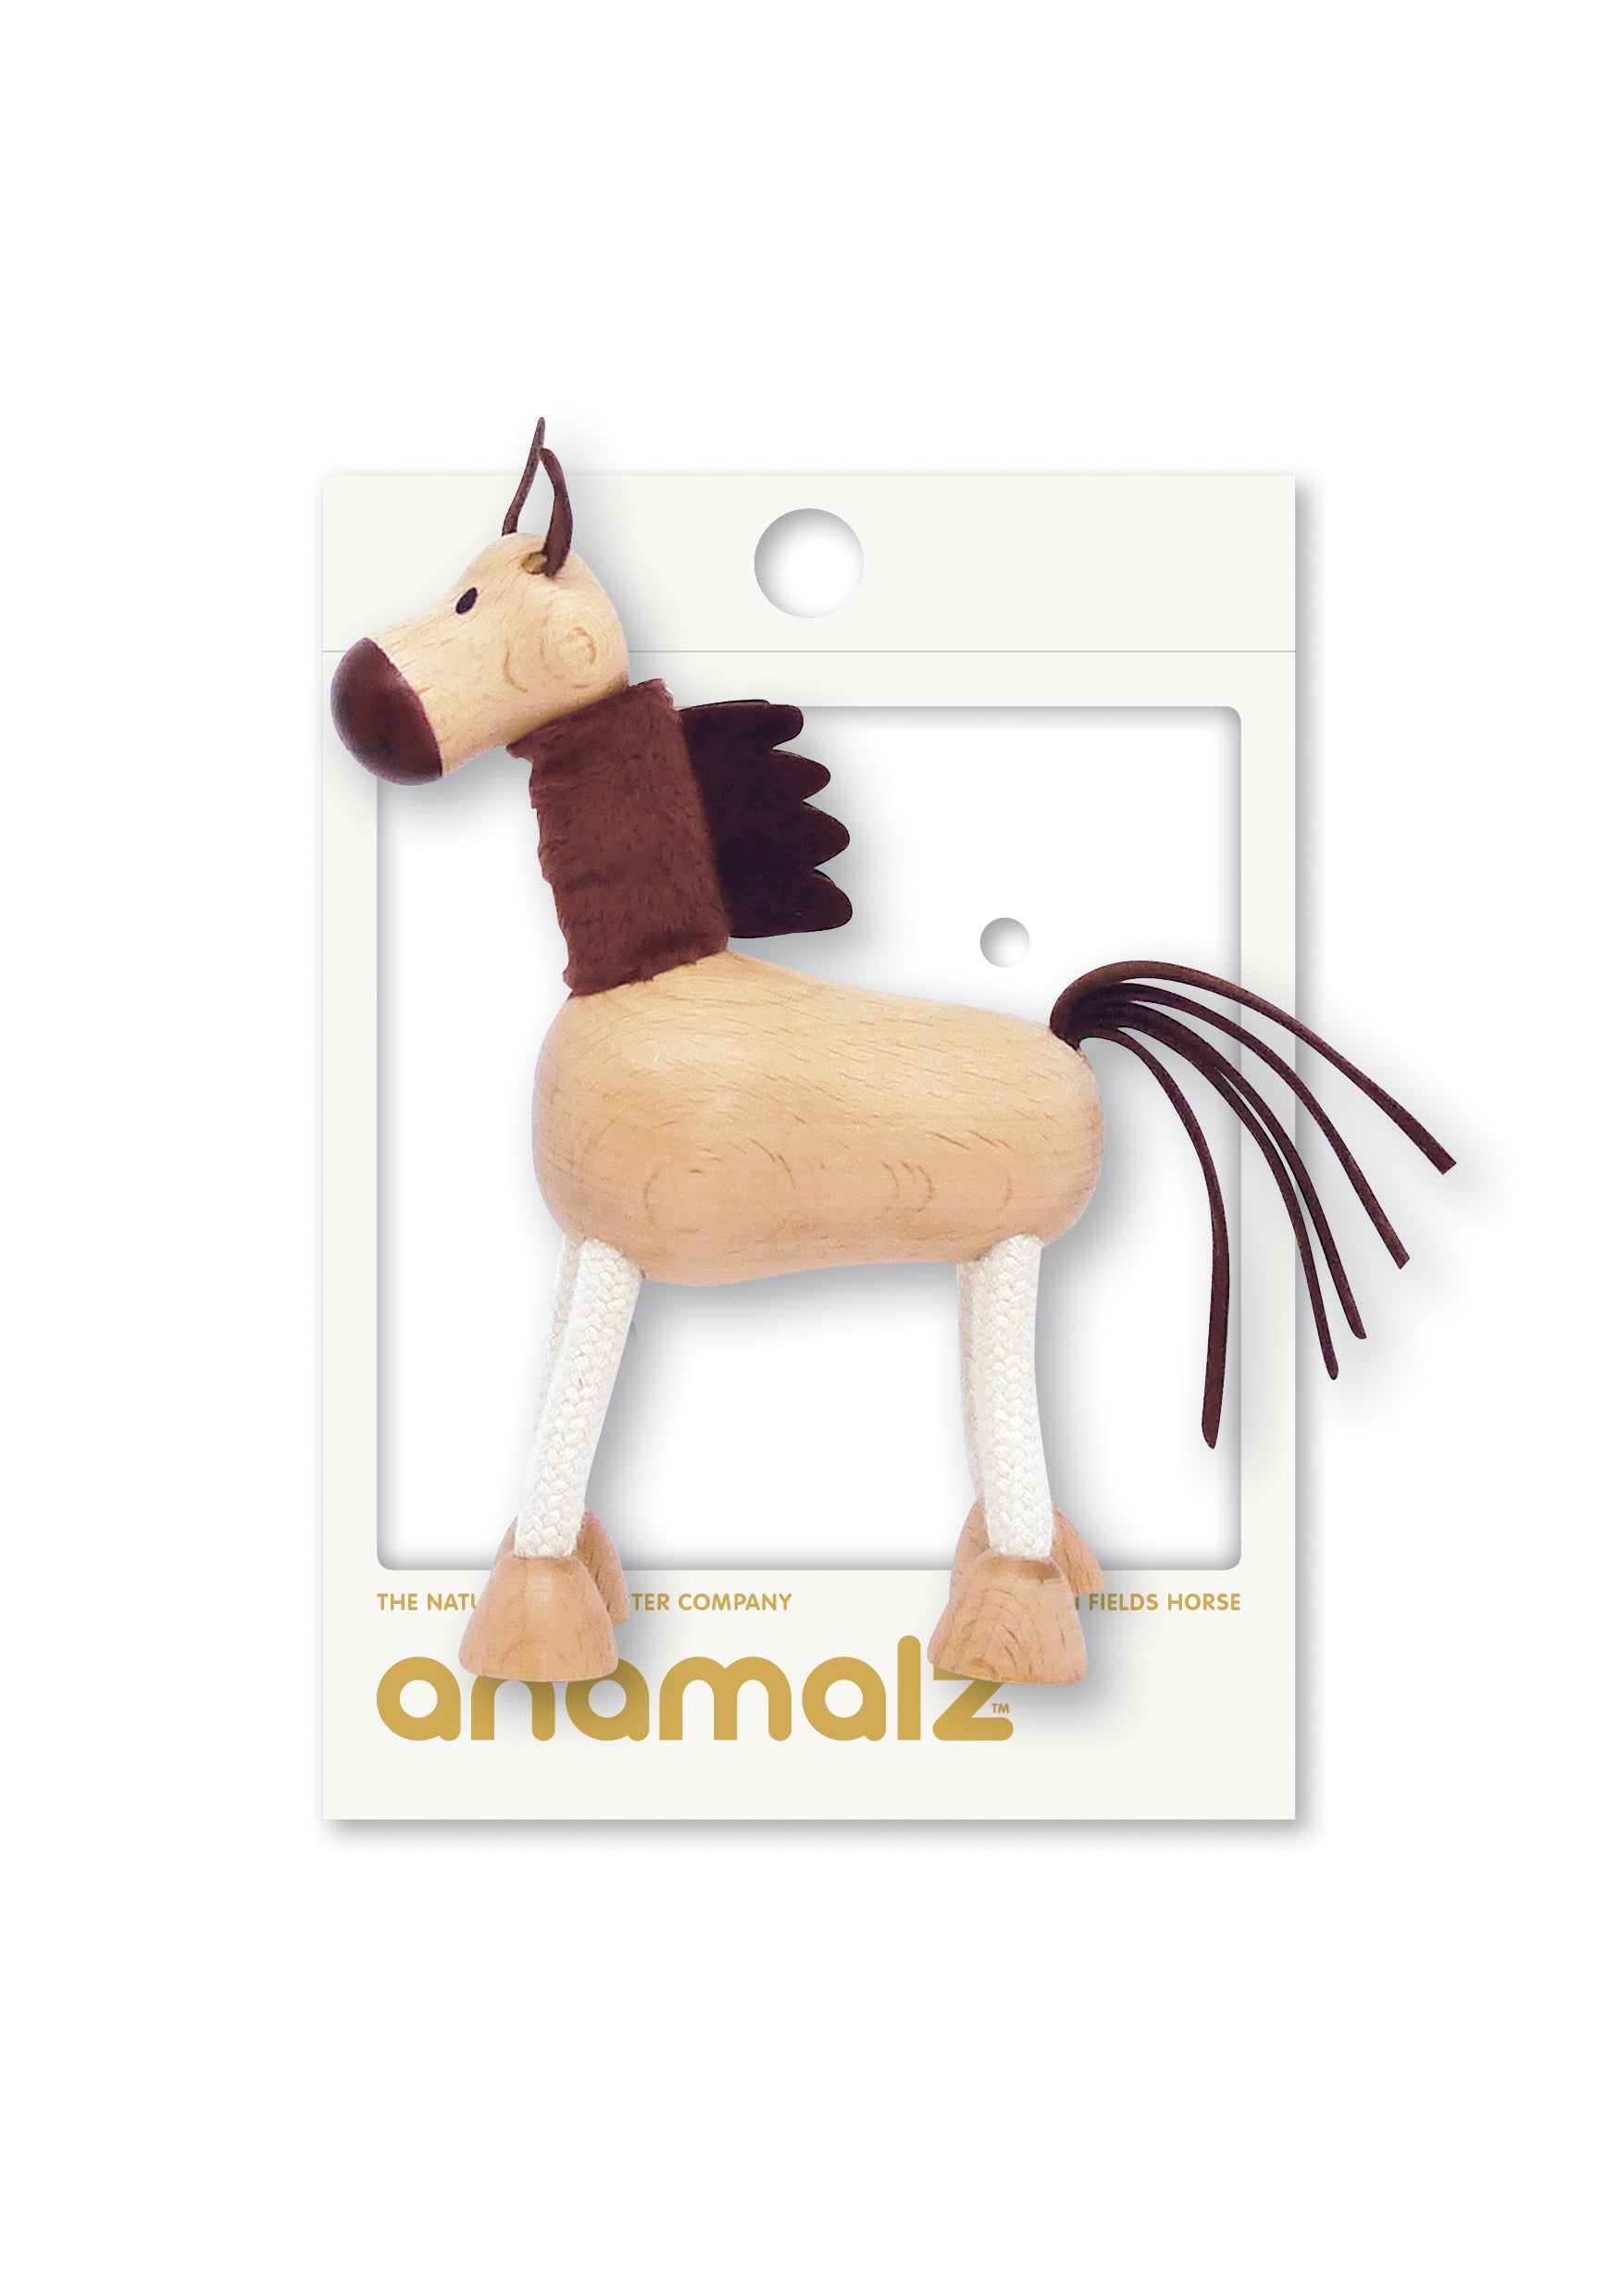 Adorable eco-friendly wooden horse toy with floppy ears and long fabric tail, perfect for imaginative play and learning.